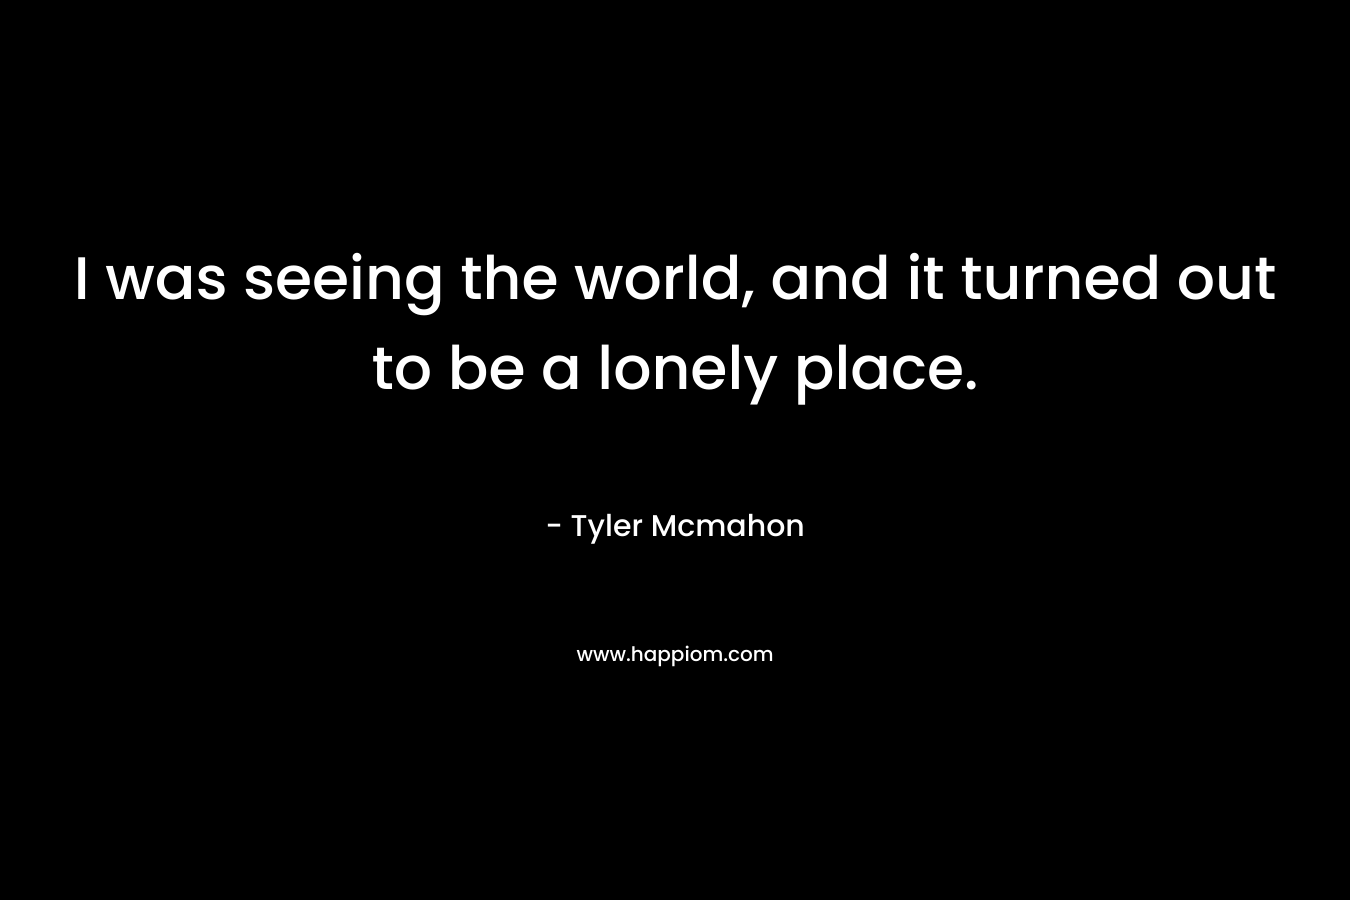 I was seeing the world, and it turned out to be a lonely place. – Tyler Mcmahon